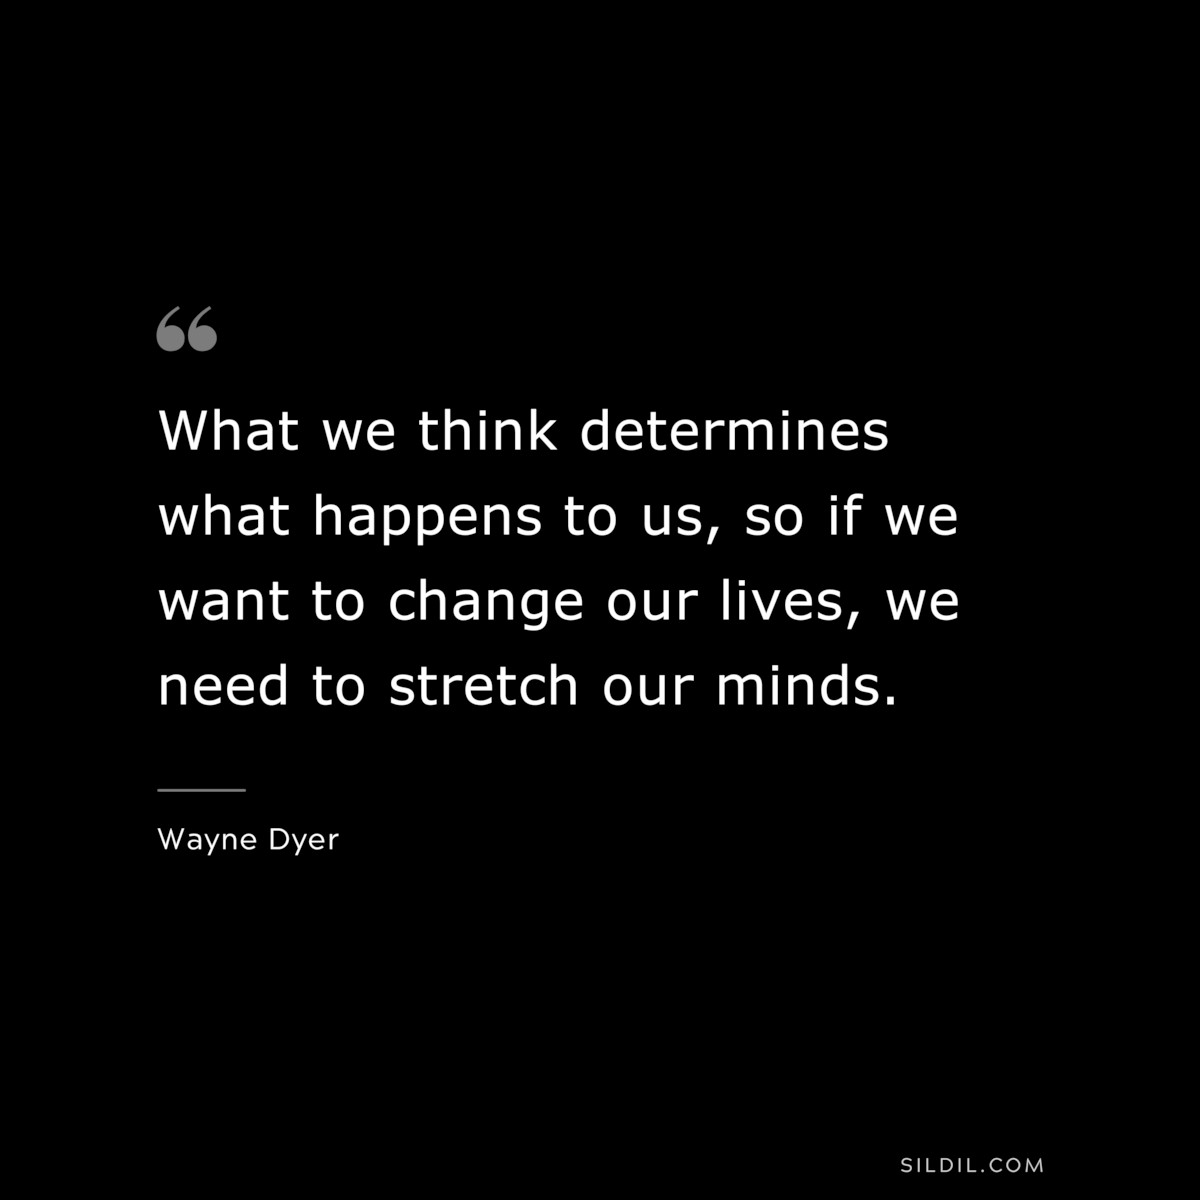 What we think determines what happens to us, so if we want to change our lives, we need to stretch our minds. ― Wayne Dyer